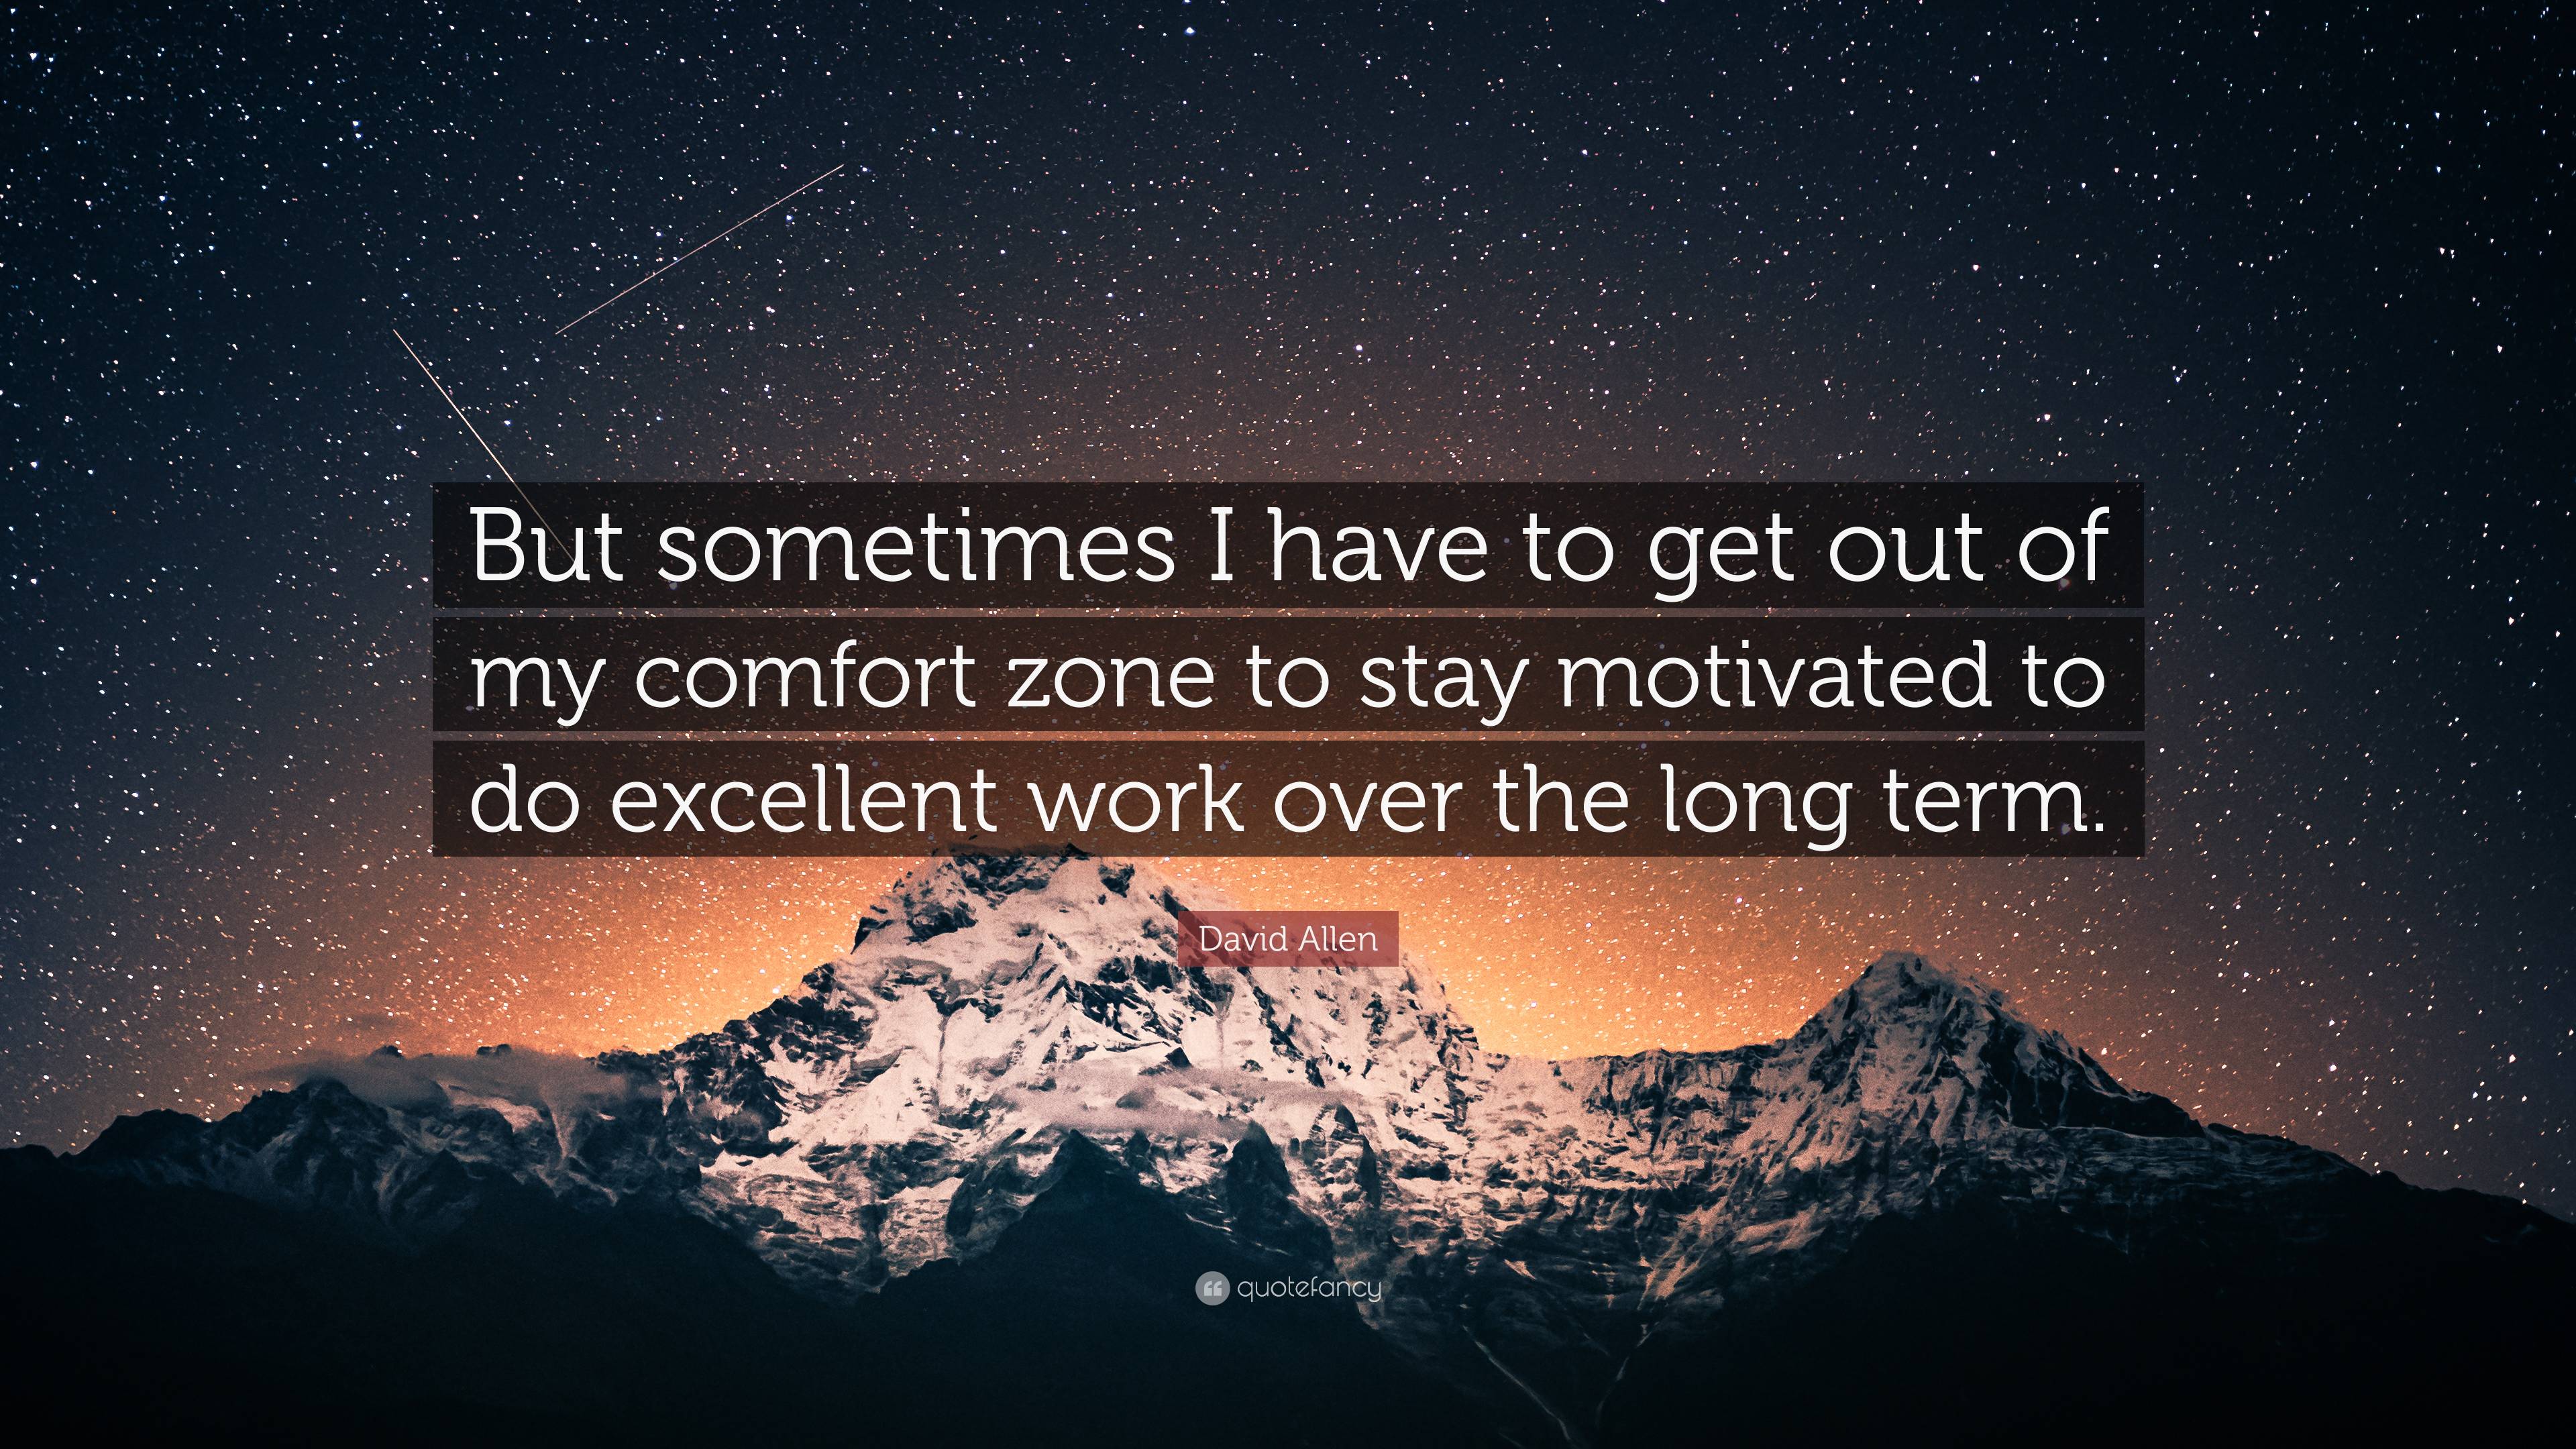 https://quotefancy.com/media/wallpaper/3840x2160/7152895-David-Allen-Quote-But-sometimes-I-have-to-get-out-of-my-comfort.jpg